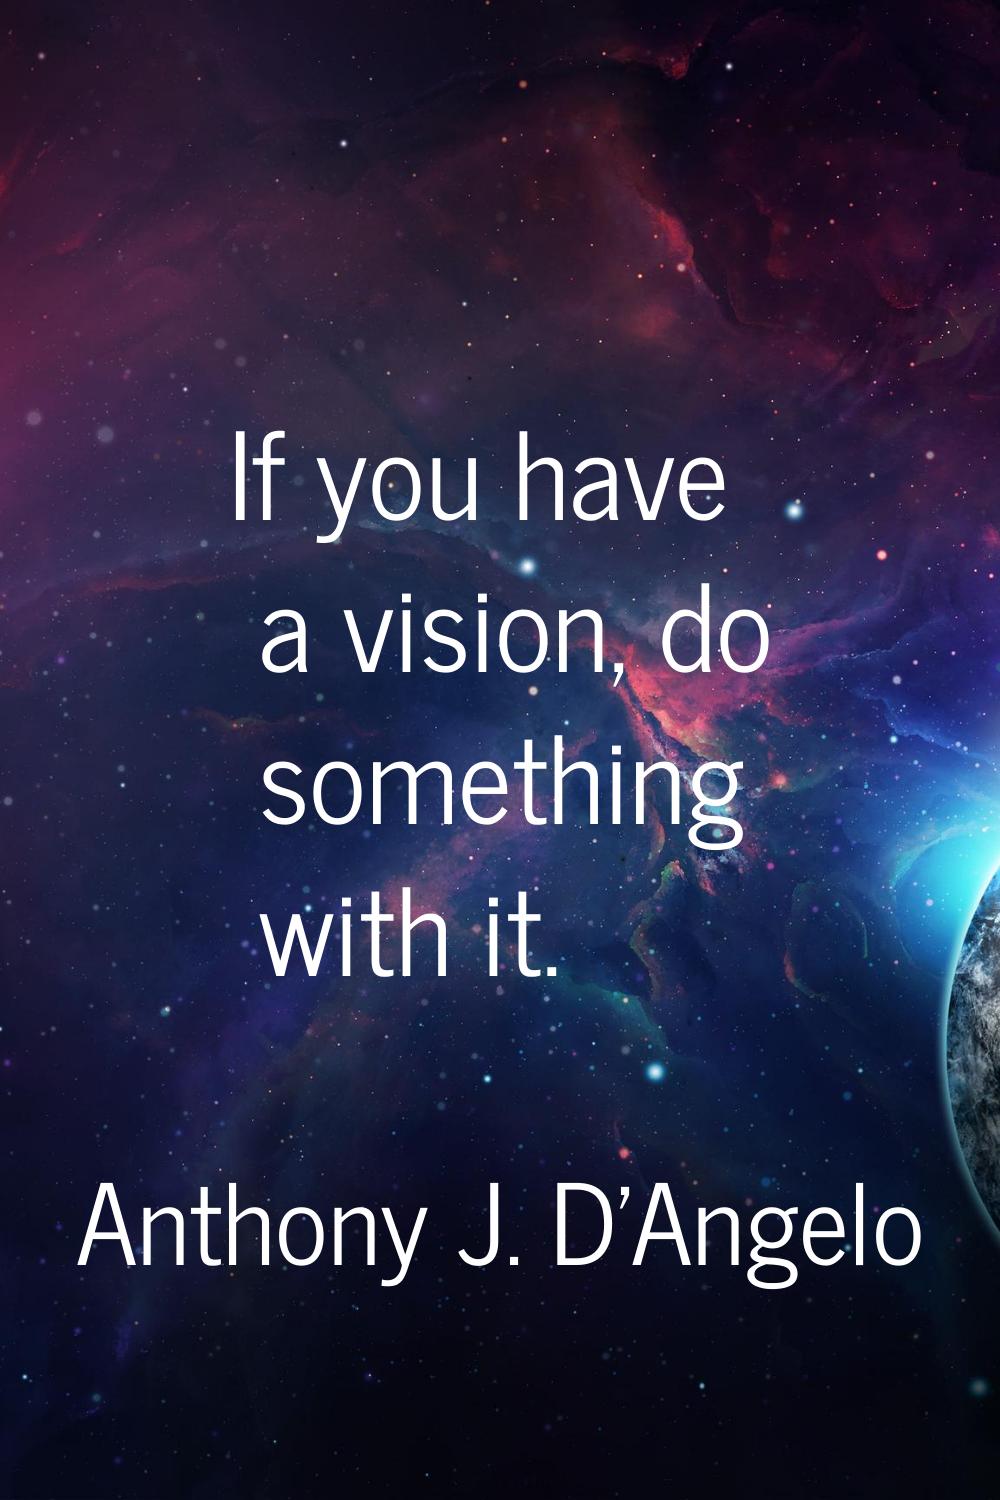 If you have a vision, do something with it.